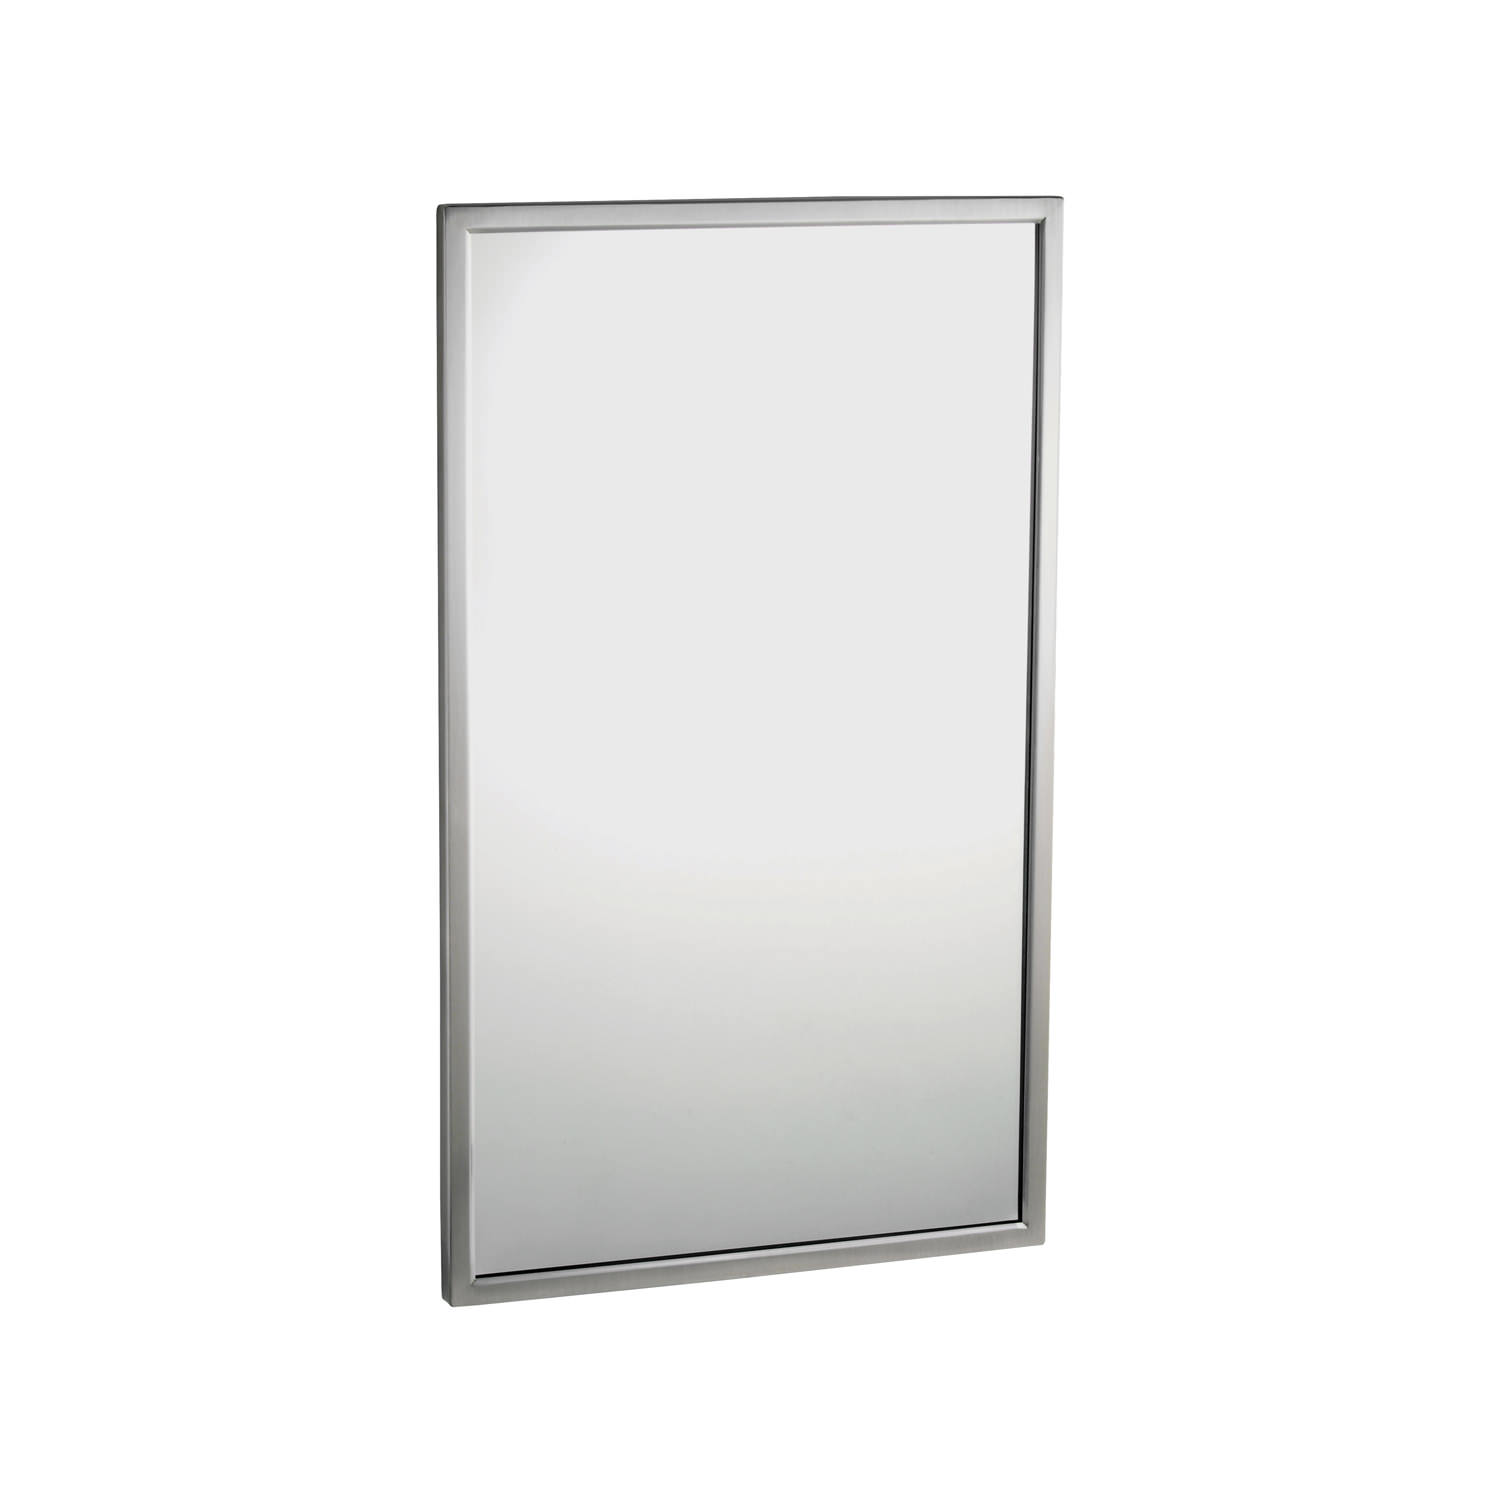 Glass Mirror With Stainless Steel Angle, How To Metal Frame A Mirror